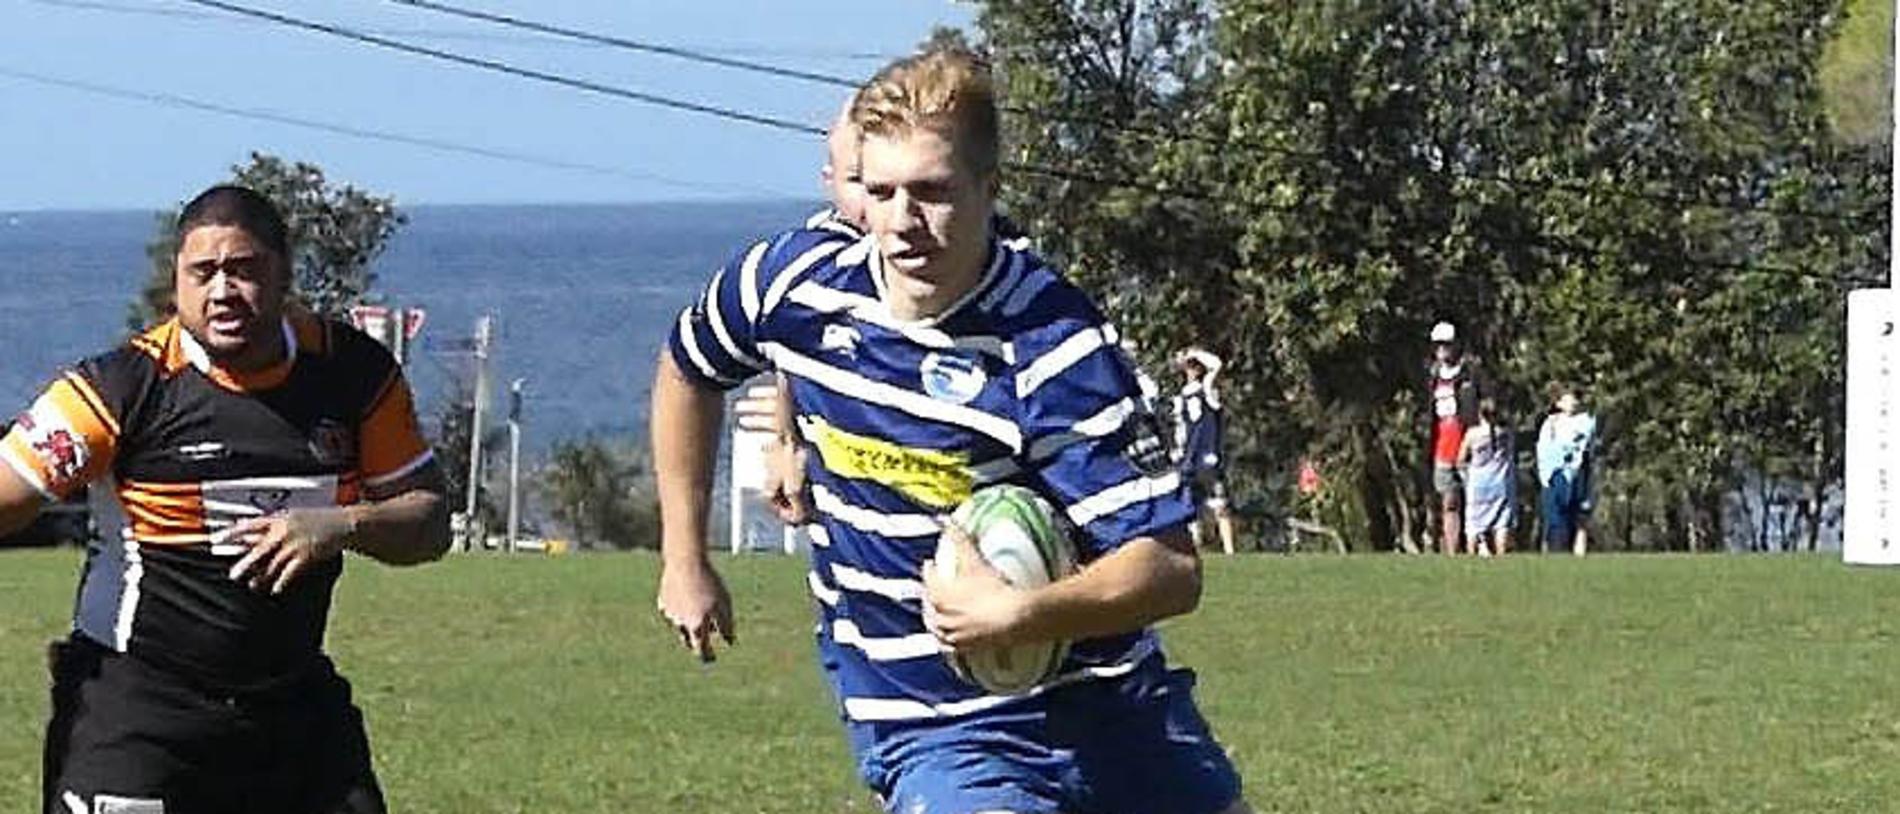 Luke Trbojevic Makes Impact With Newport Breakers Rugby Club Daily Telegraph